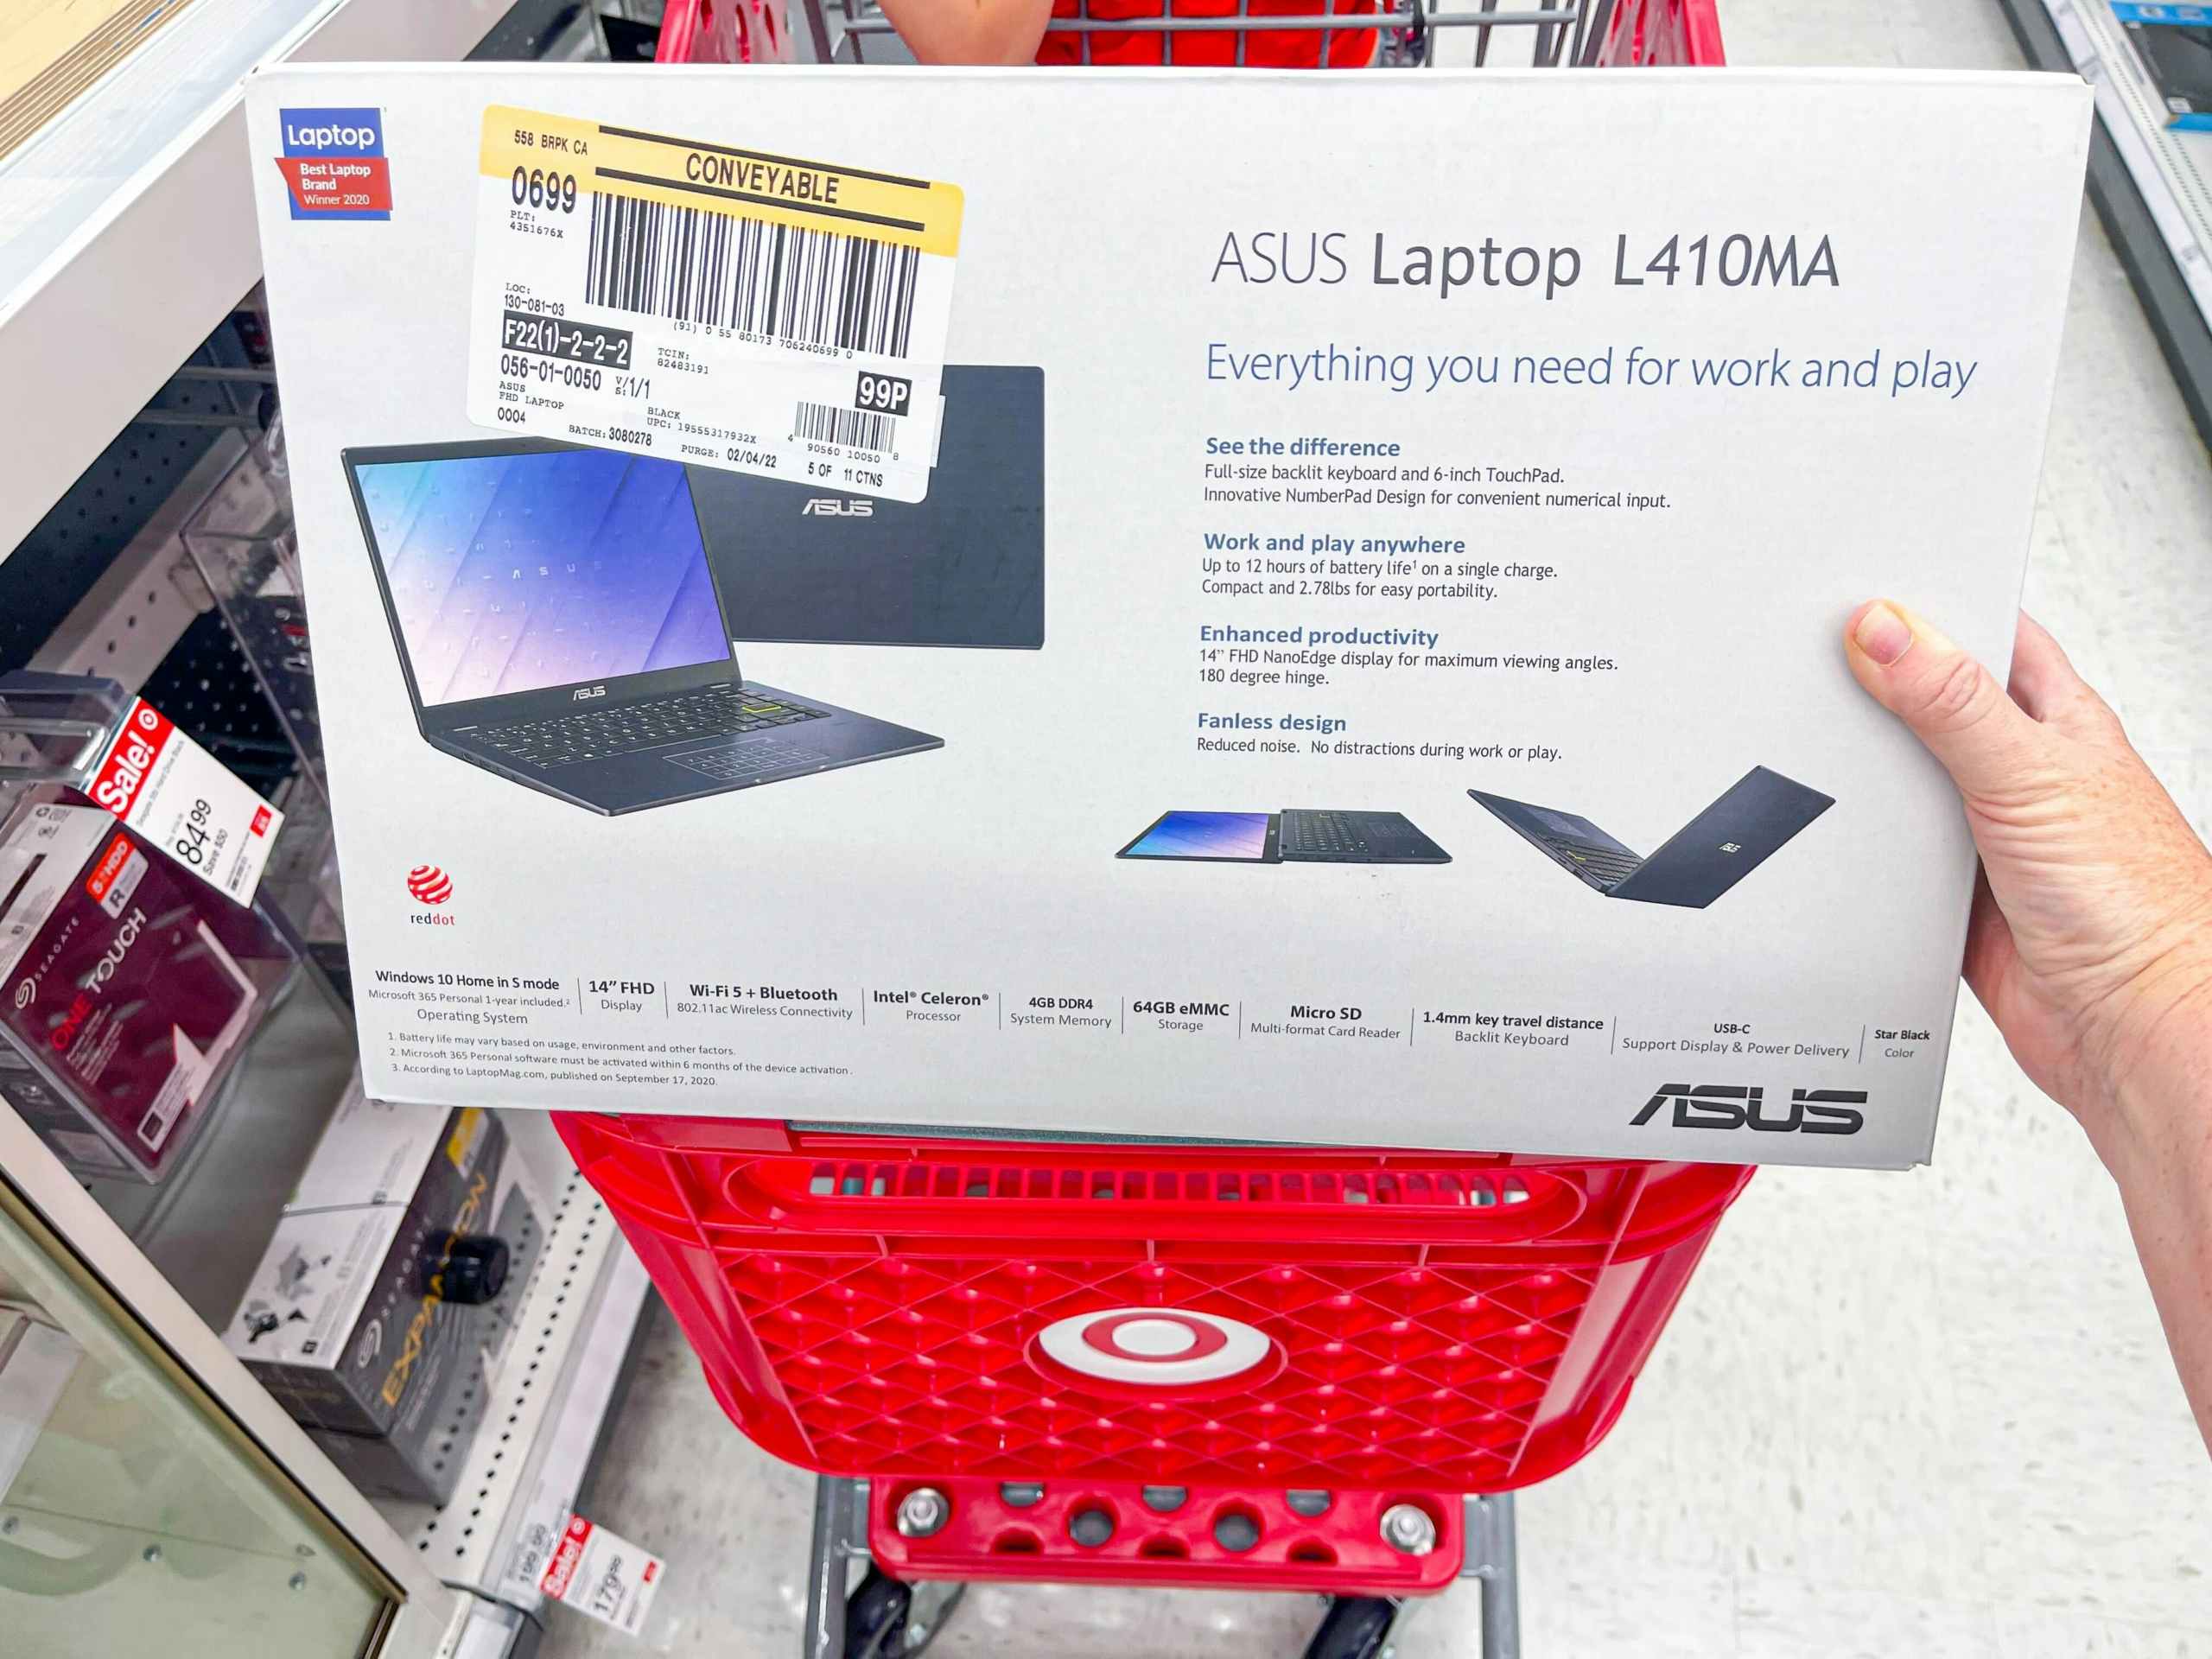 box for a laptop in Target shopping cart